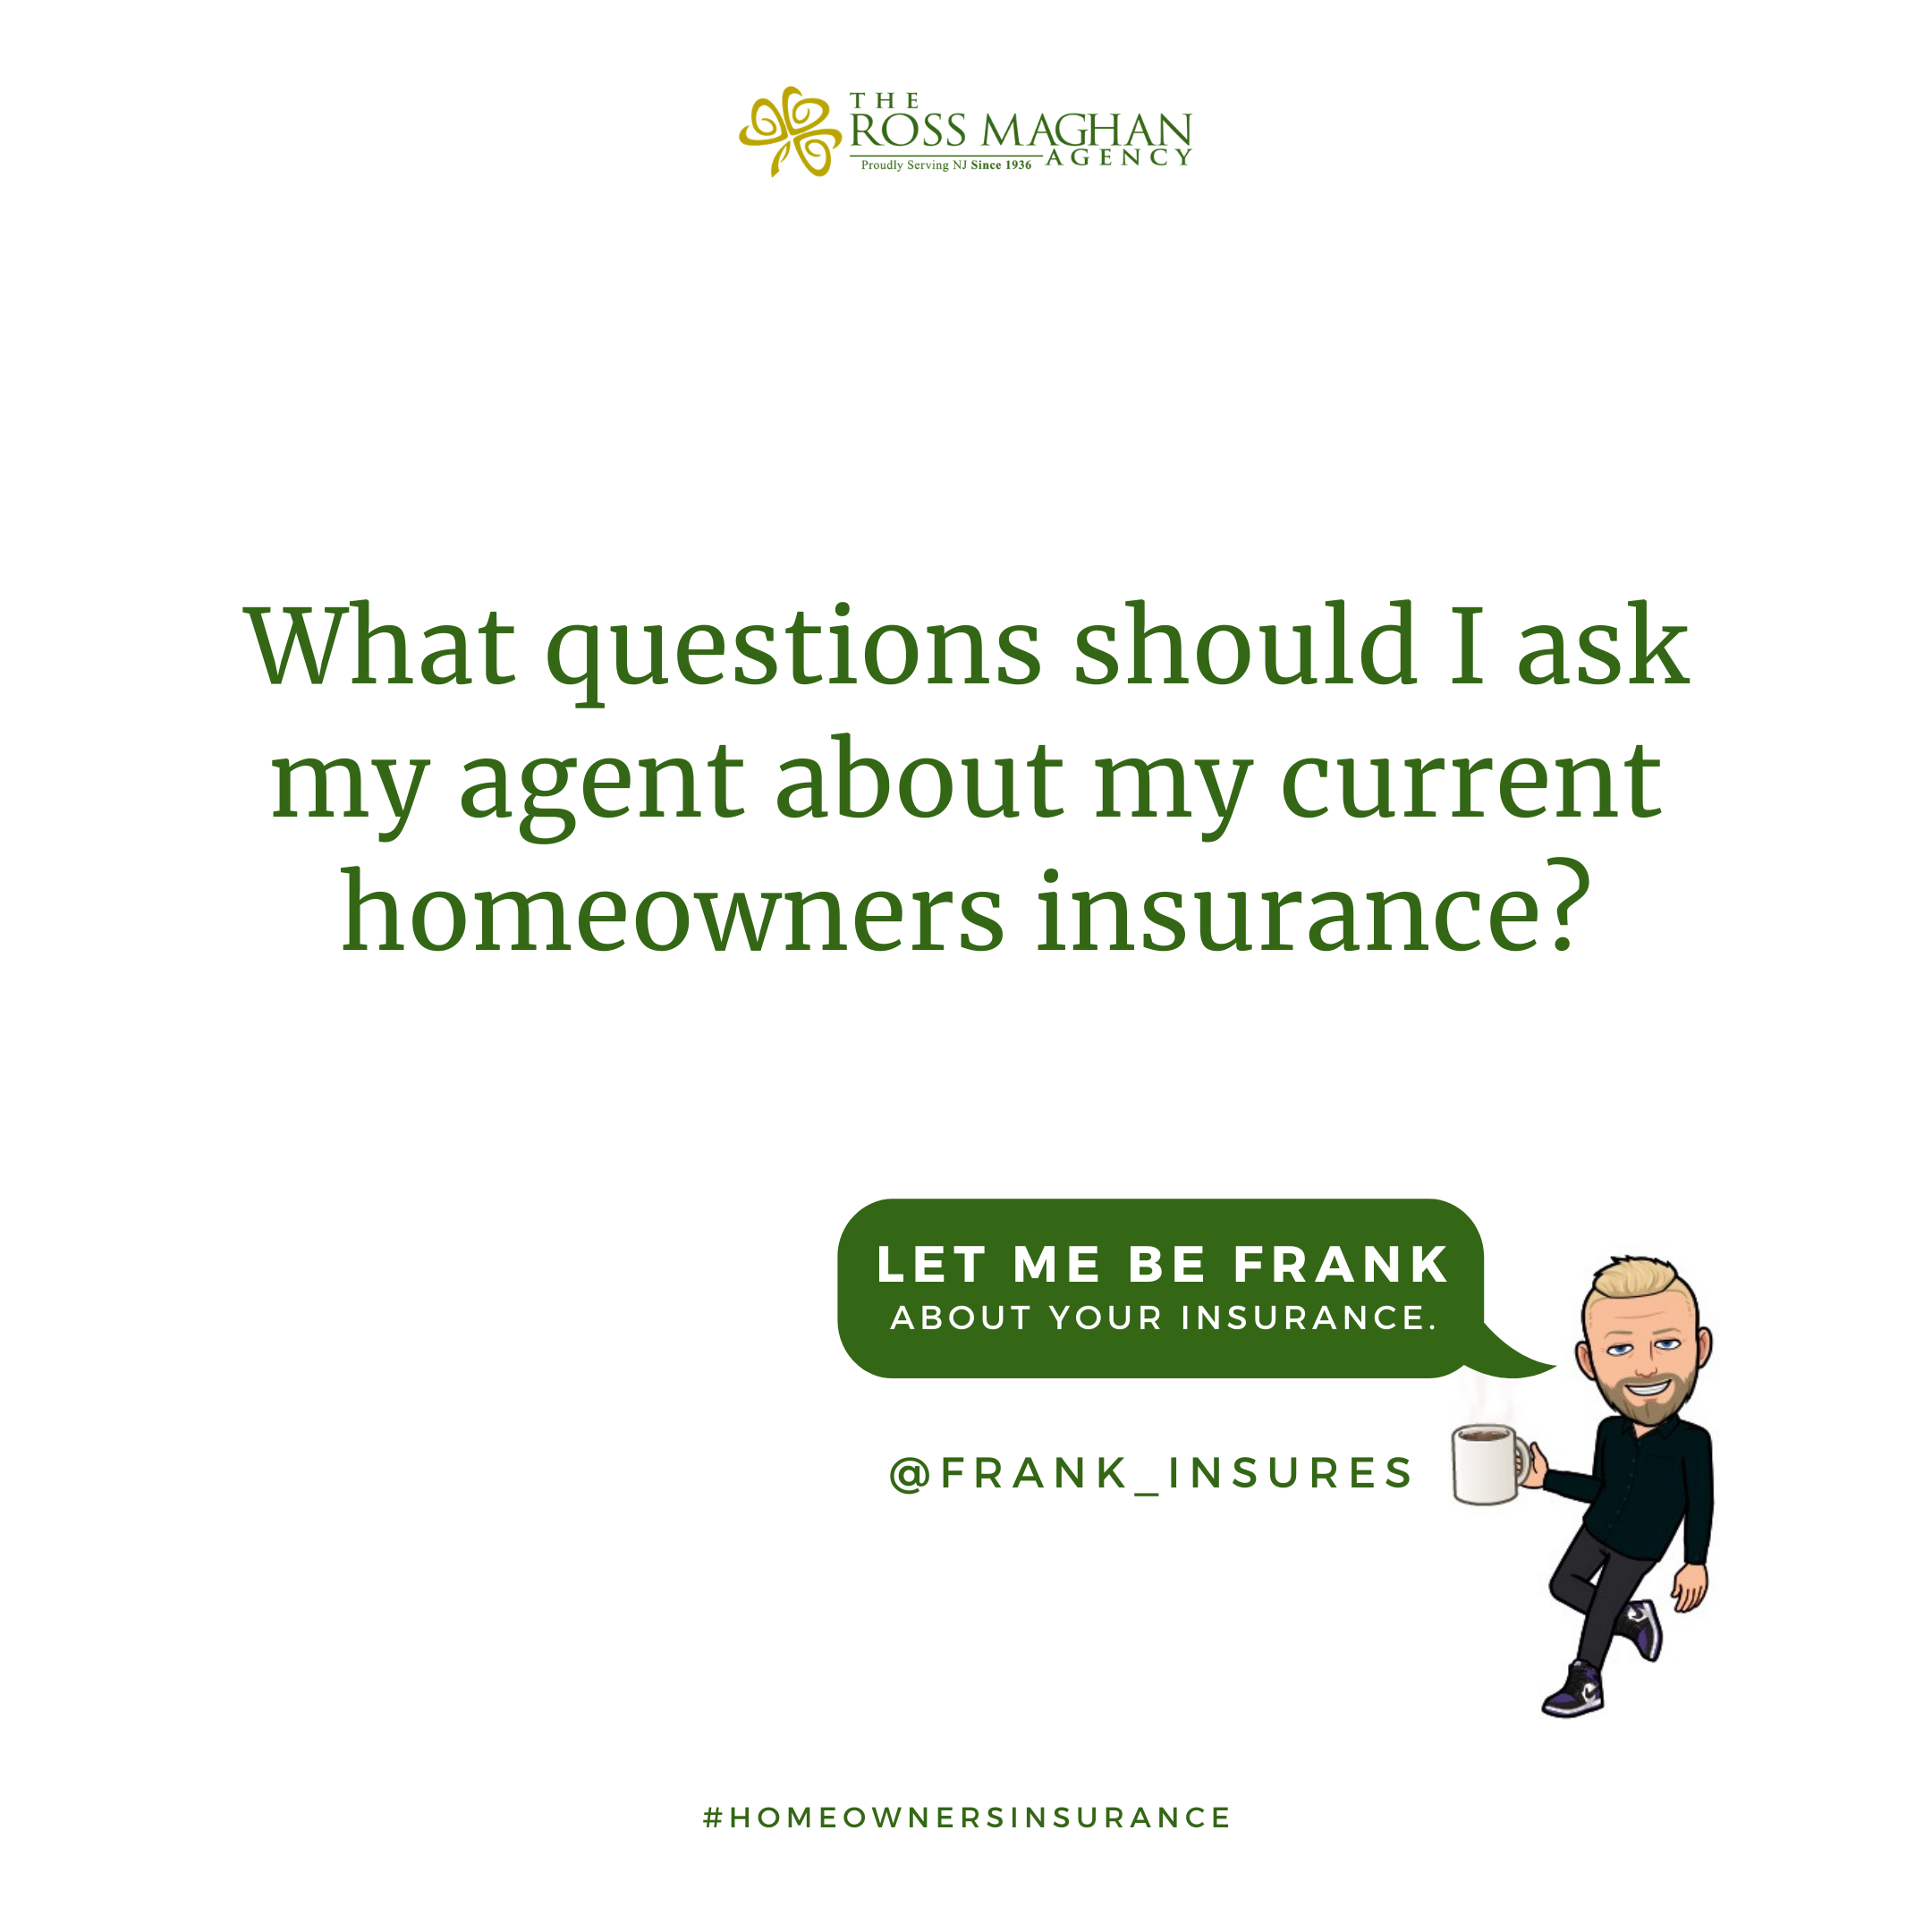 Featured image for “What questions should I ask my agent about my current homeowners insurance?”